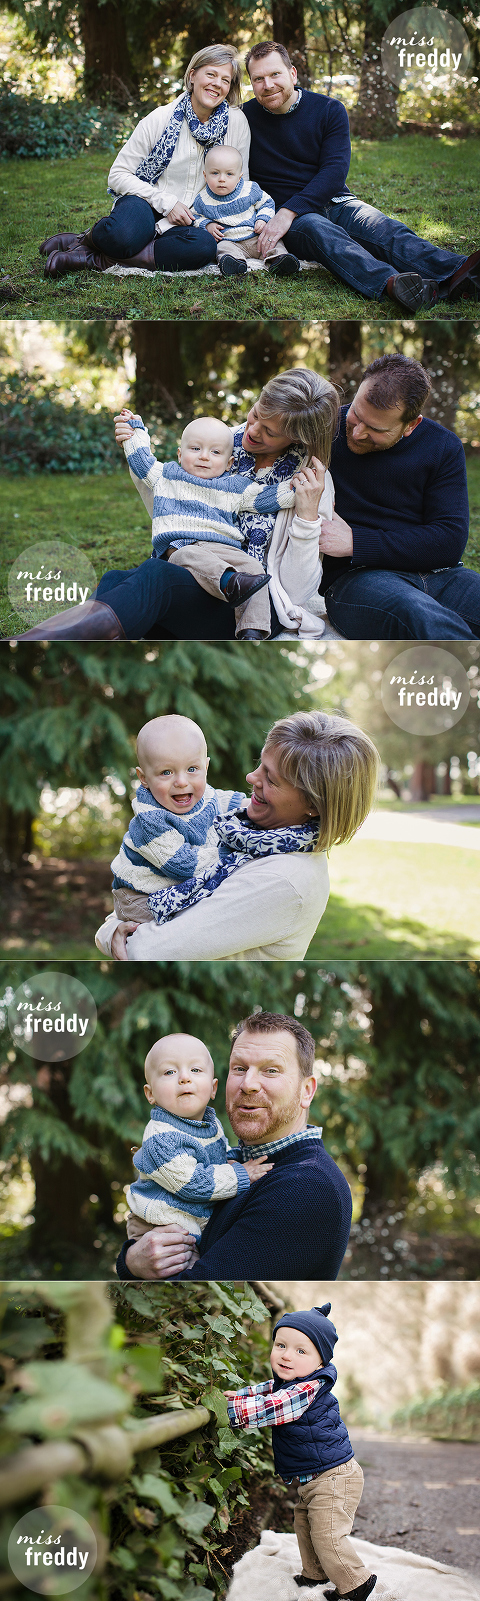 A sweet, snuggly family in their sweaters to document a first birthday milestone... captured by Miss Freddy, West Seattle baby photographer!